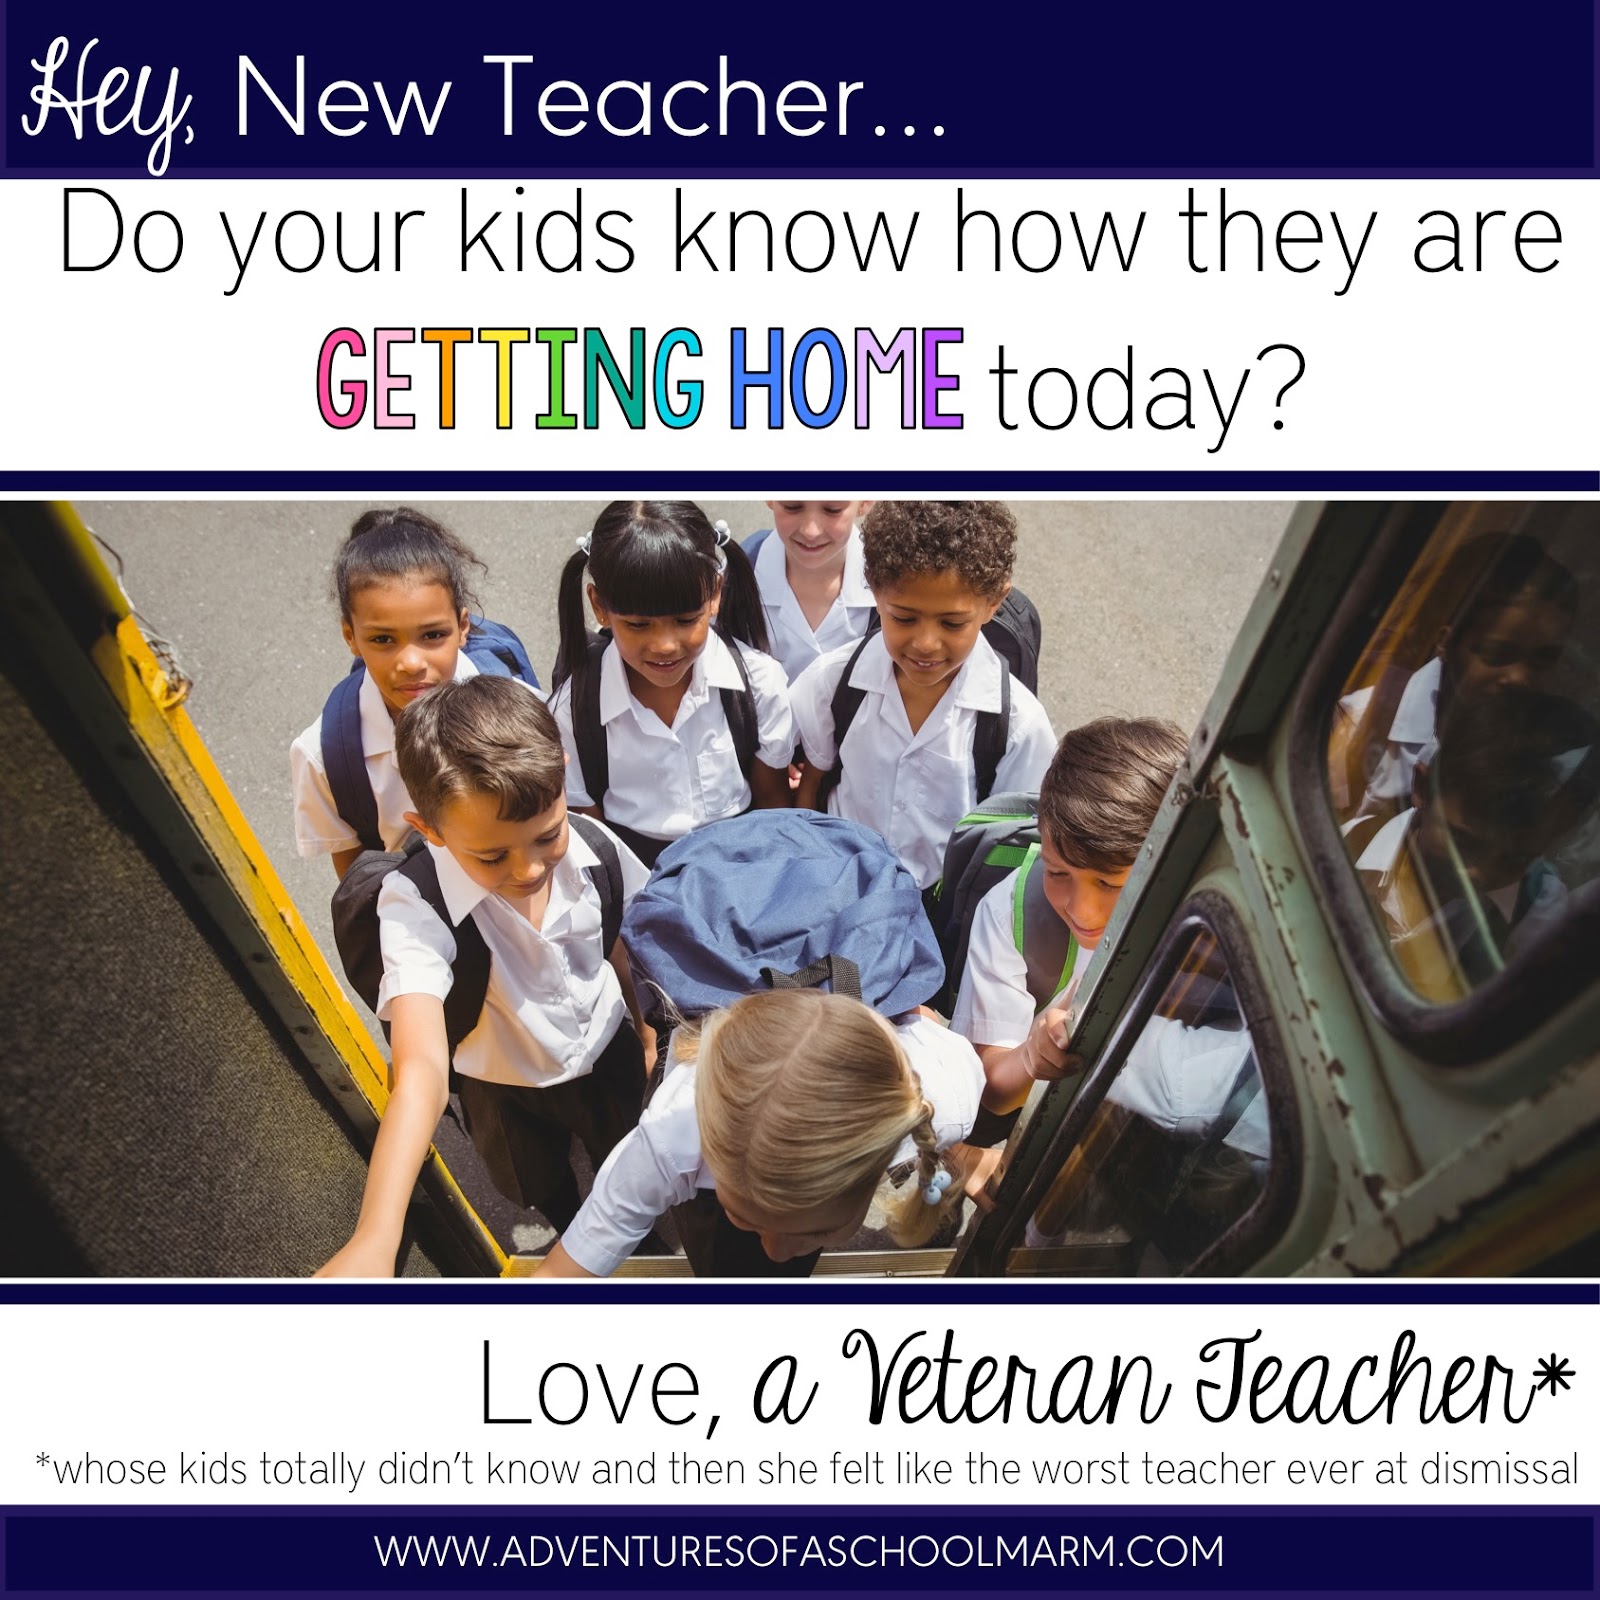 This post shares solutions to problems I wasn't expecting my first day as a new teacher. Learn from my mistakes so you can have a successful first day teaching! // Adventures of a Schoolmarm